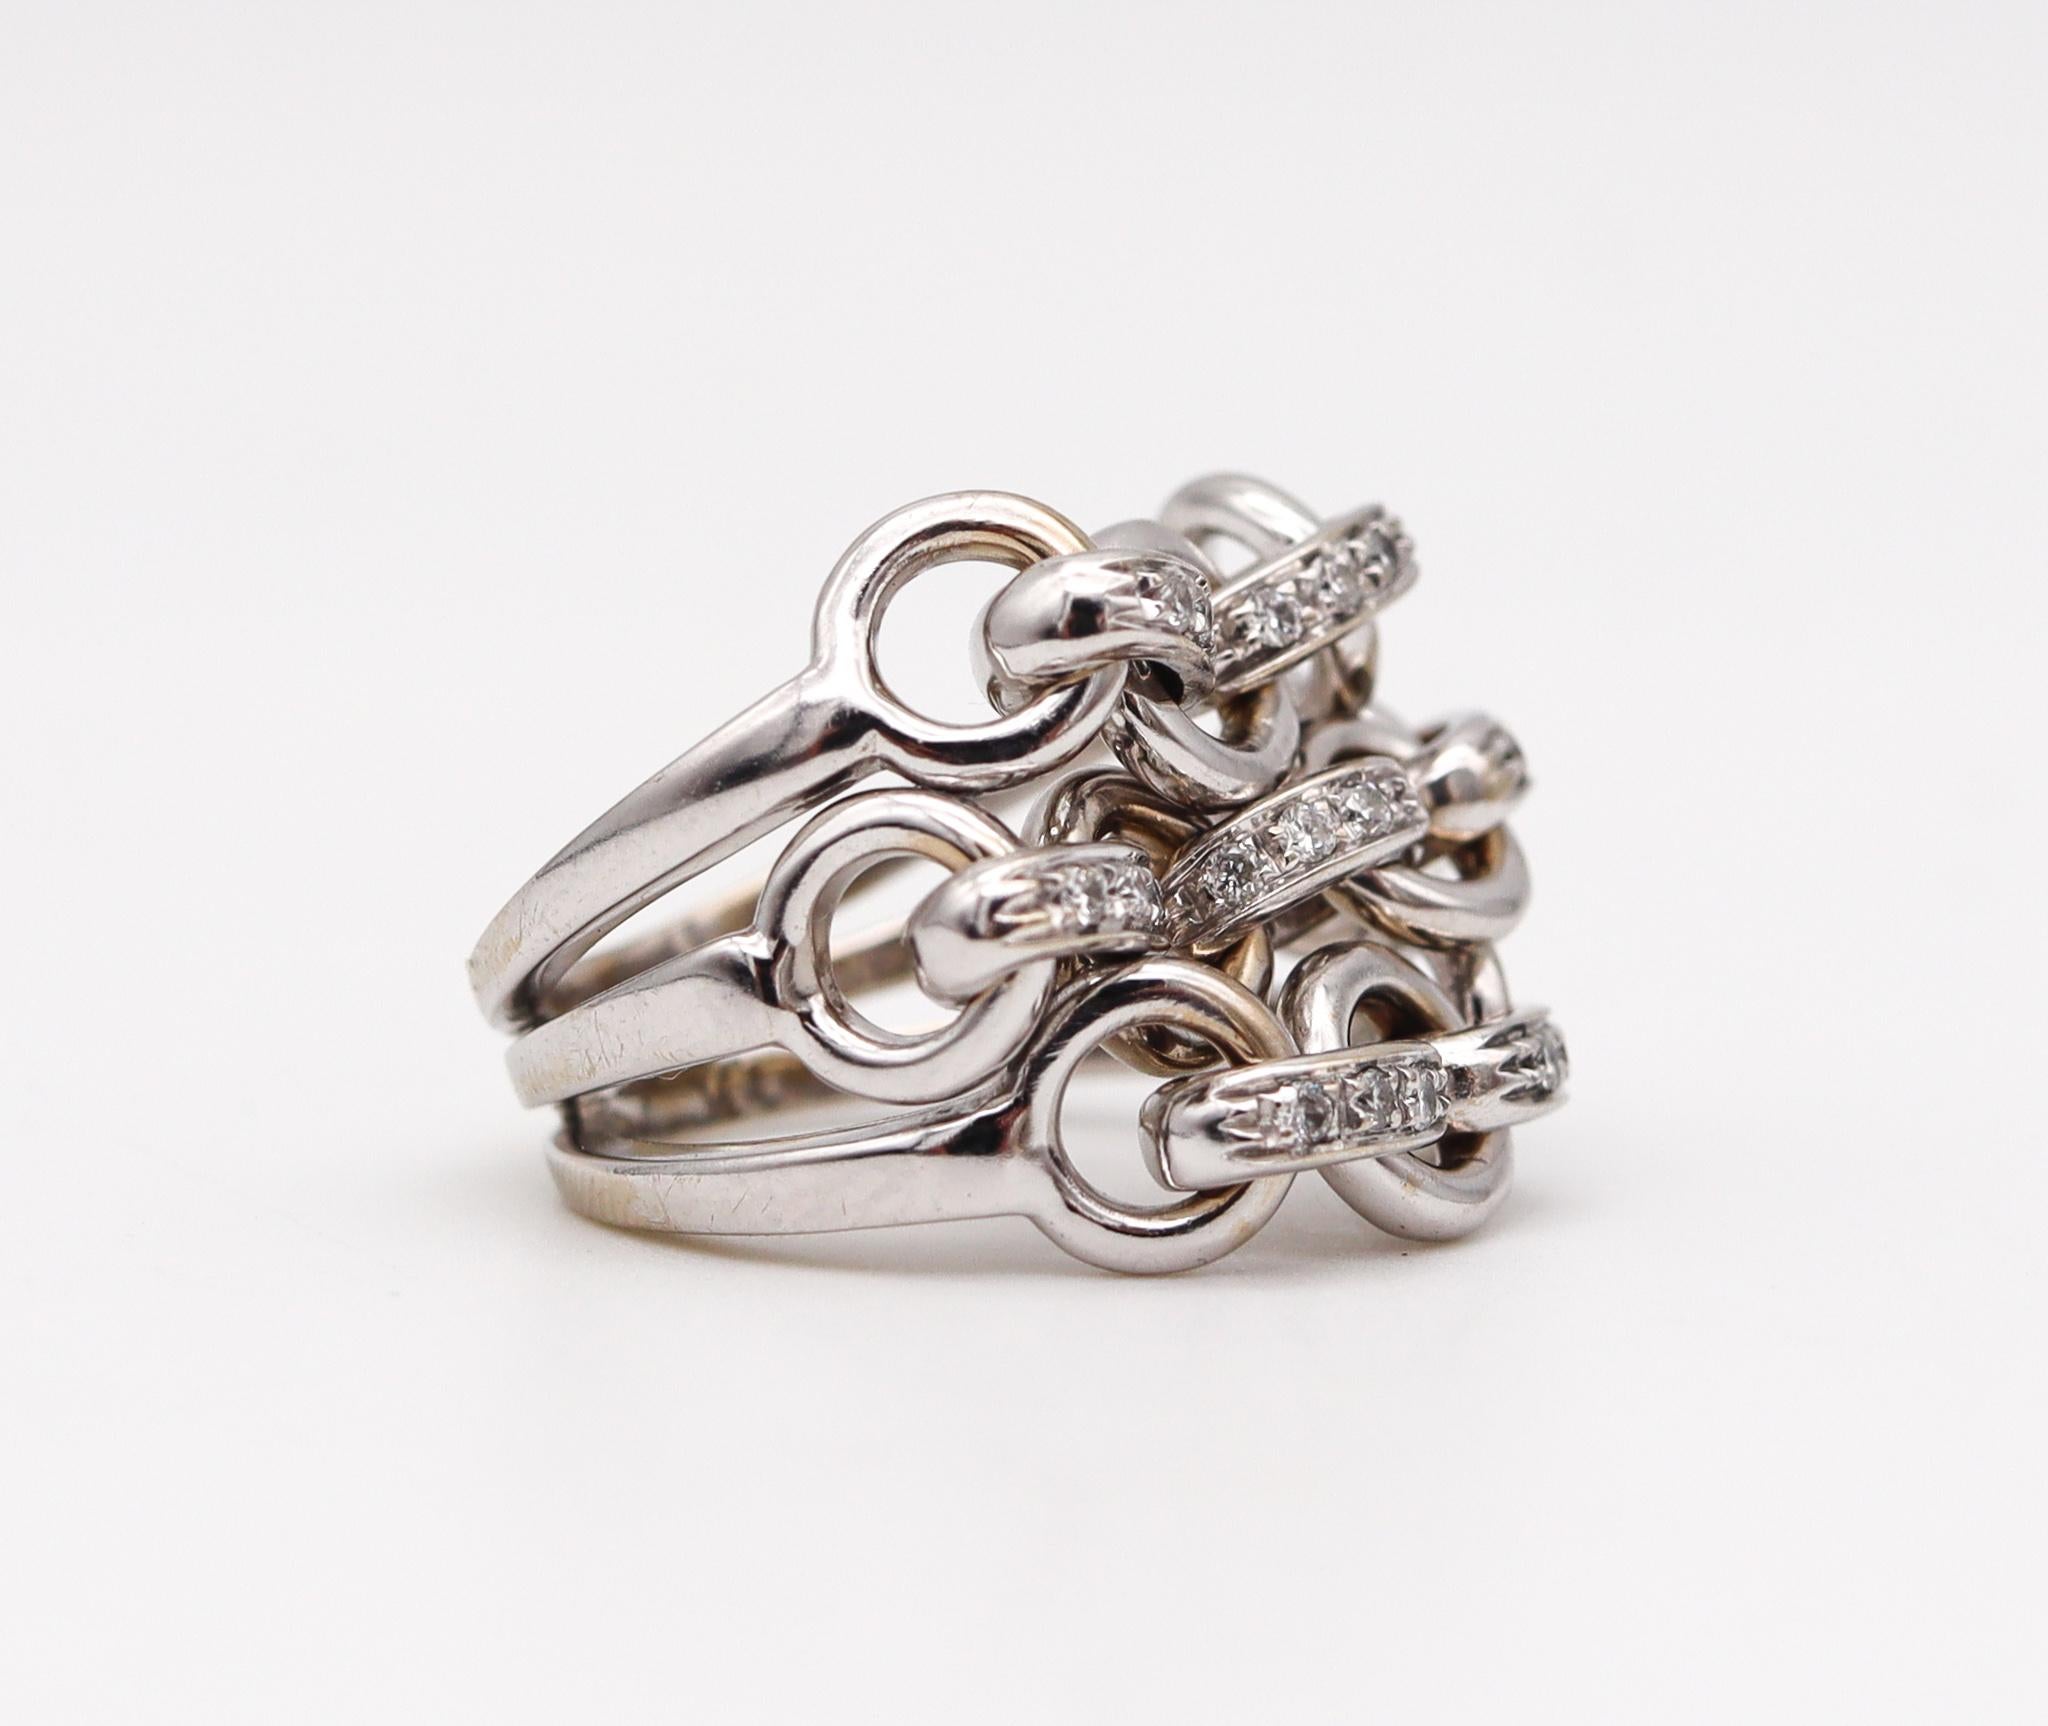 Brilliant Cut Garavelli Firenze Chained Movable Links Ring in 18Kt White Gold with Diamonds